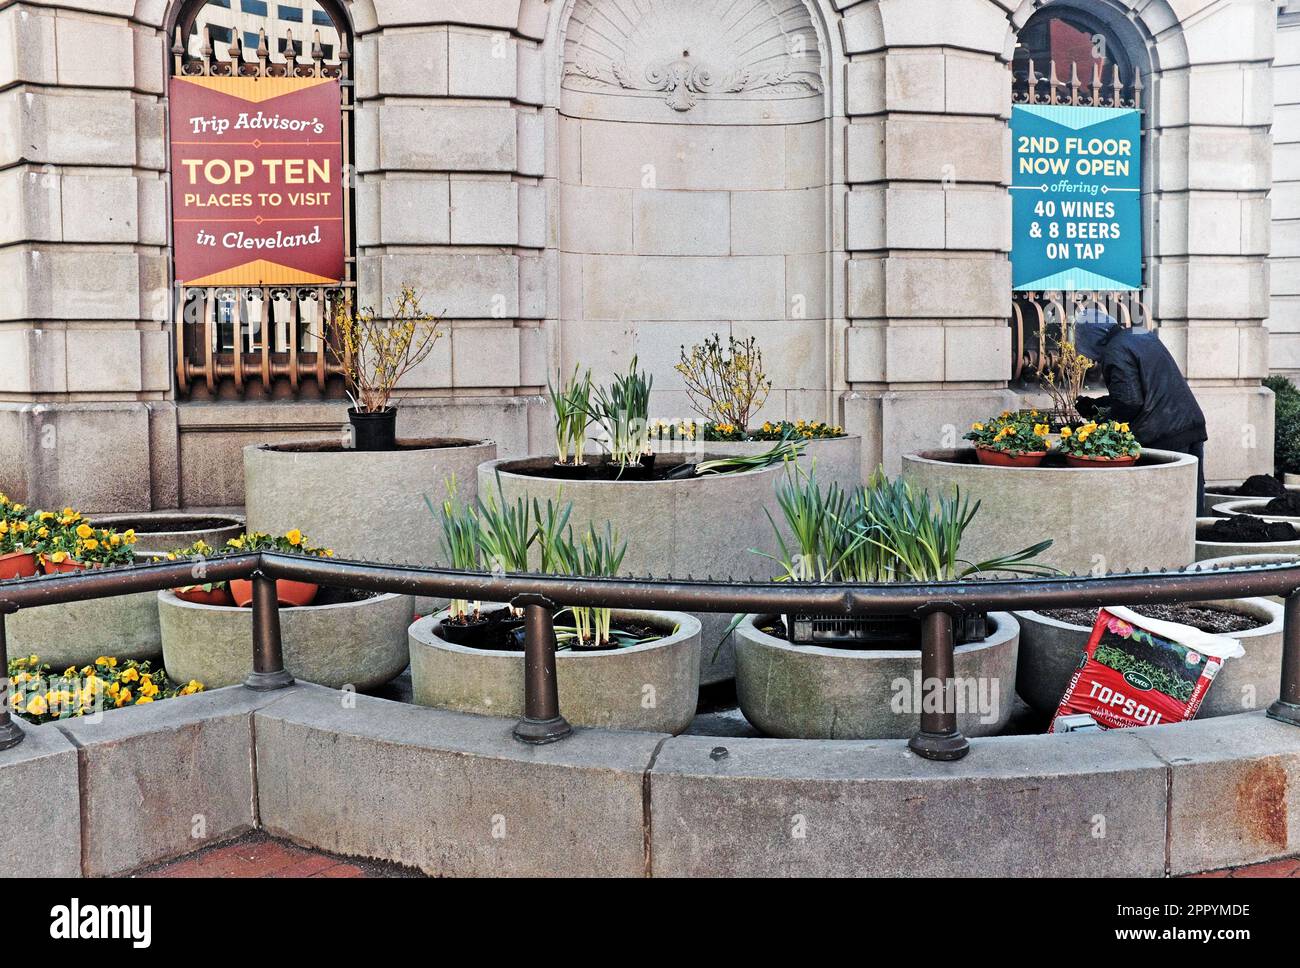 A man works on planting spring flowers outside the downtown Cleveland Heinen's Beaux Arts Building on the corner of East 9th and Euclid Ave. Stock Photo